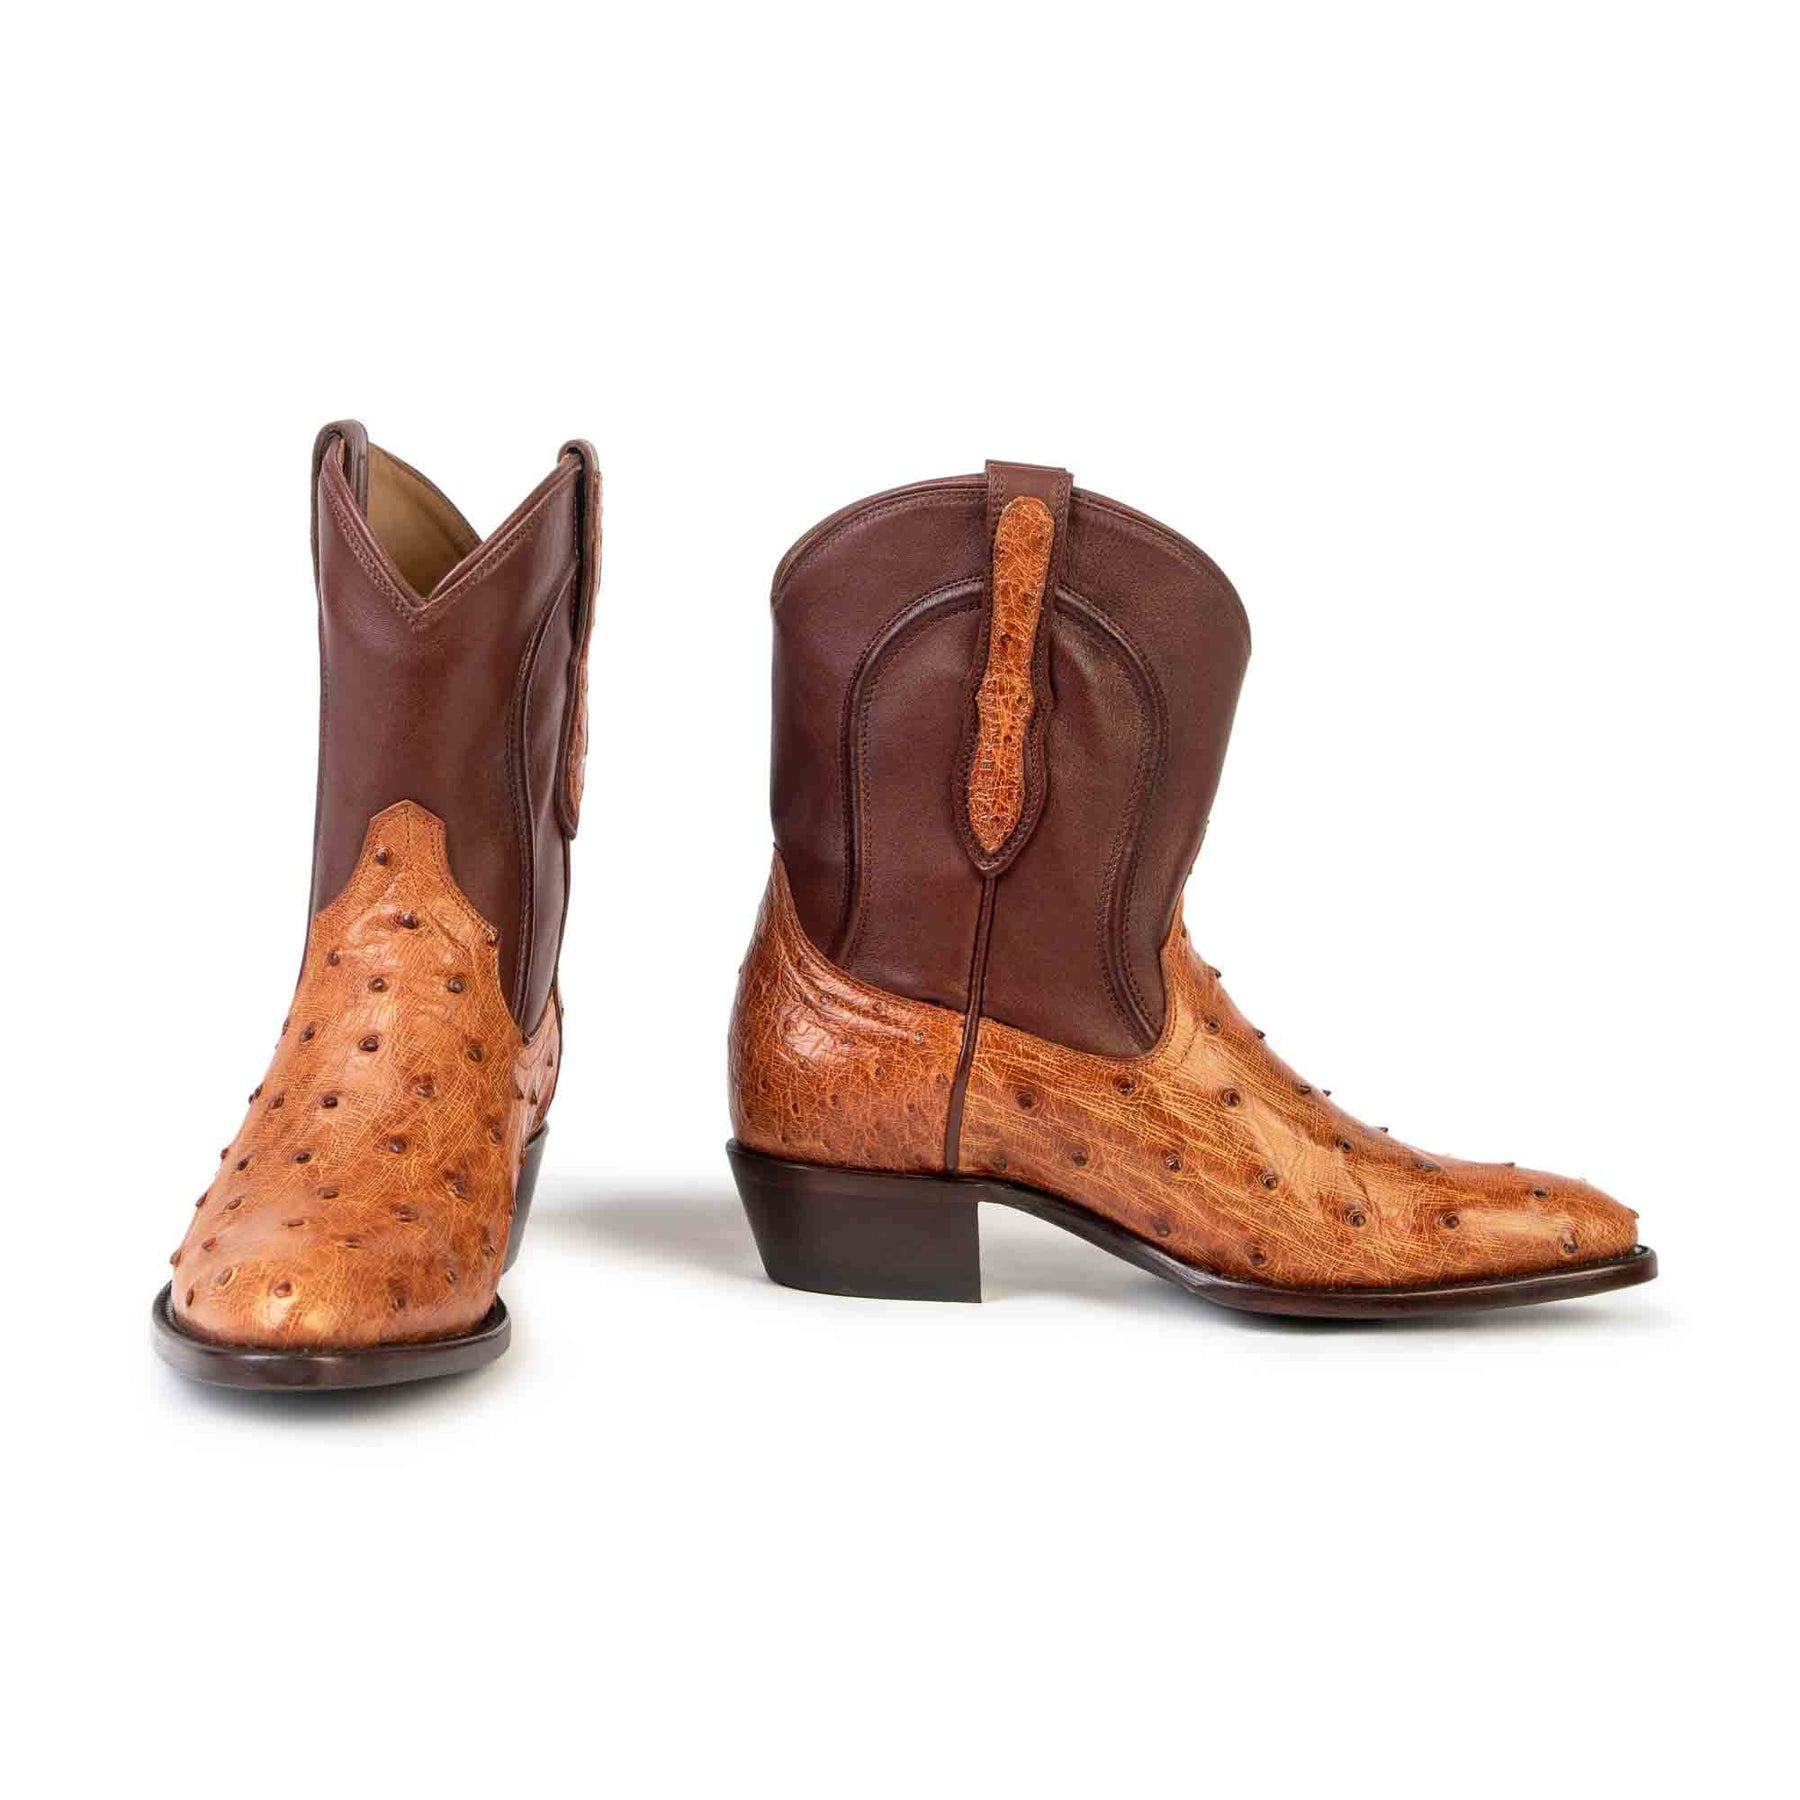 Women's Full-Quill Ostrich Bootie Boot by RUJO